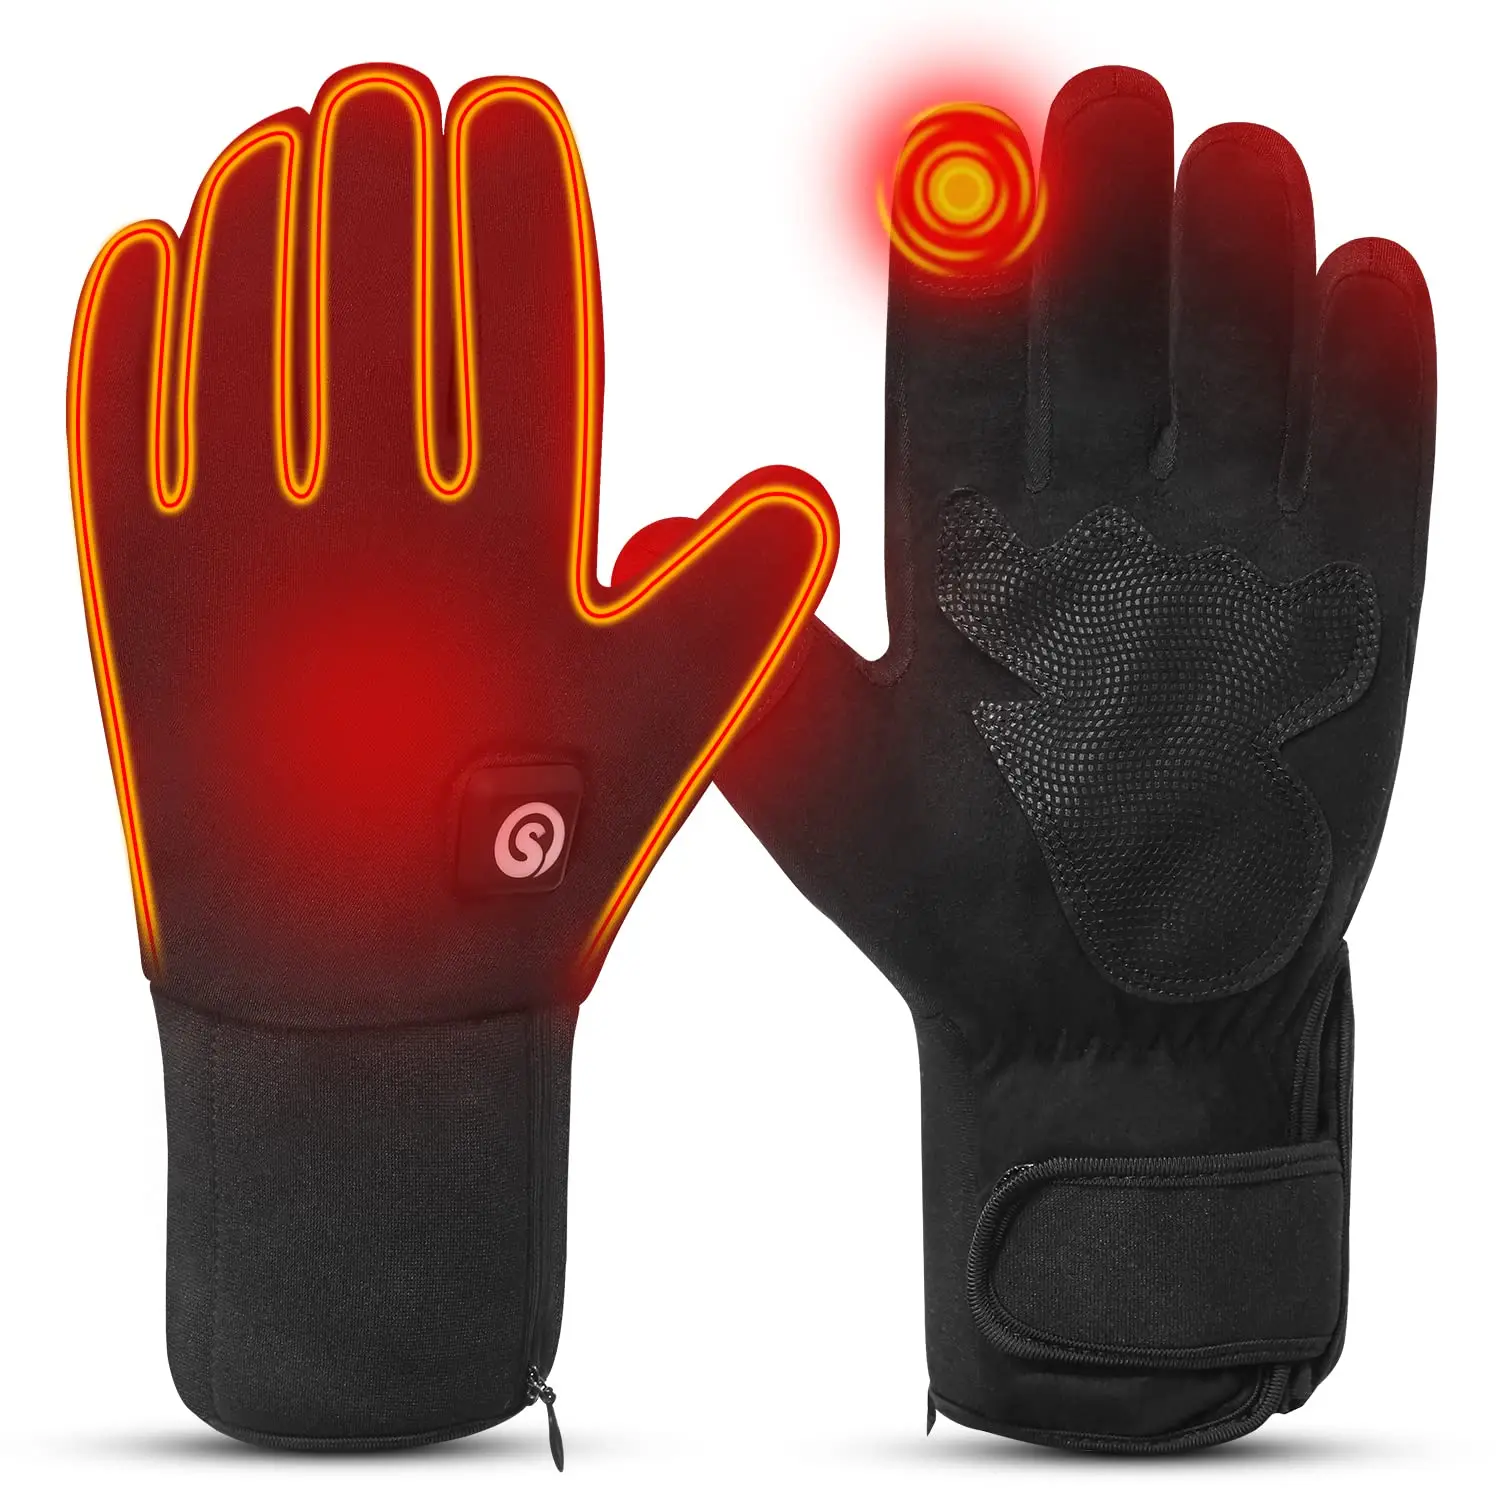 Men Women Rechargeable Electric Arthritis HandHeated Ski Gloves ,Snow Winter Warm Outdoor Cycling, Motorcycle Hiking Mittens